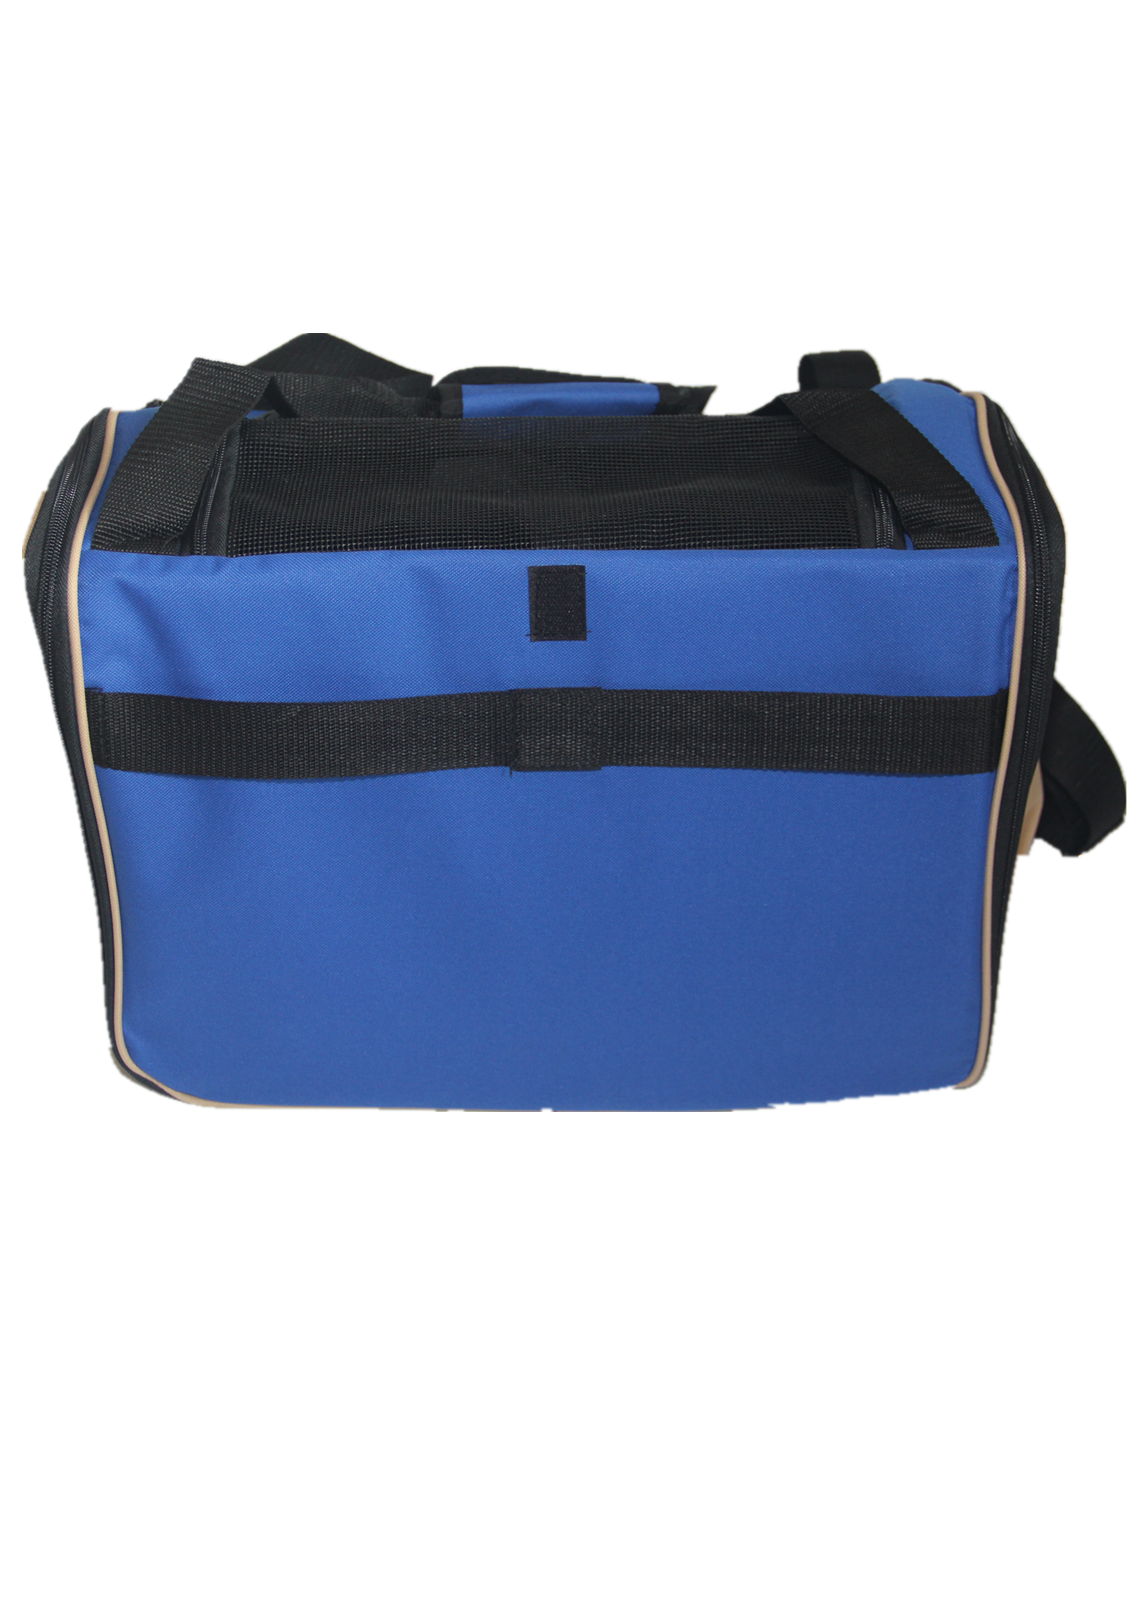 Pet Carrier Dog Cat Car Booster Seat Portable Soft Cage Travel-Blue